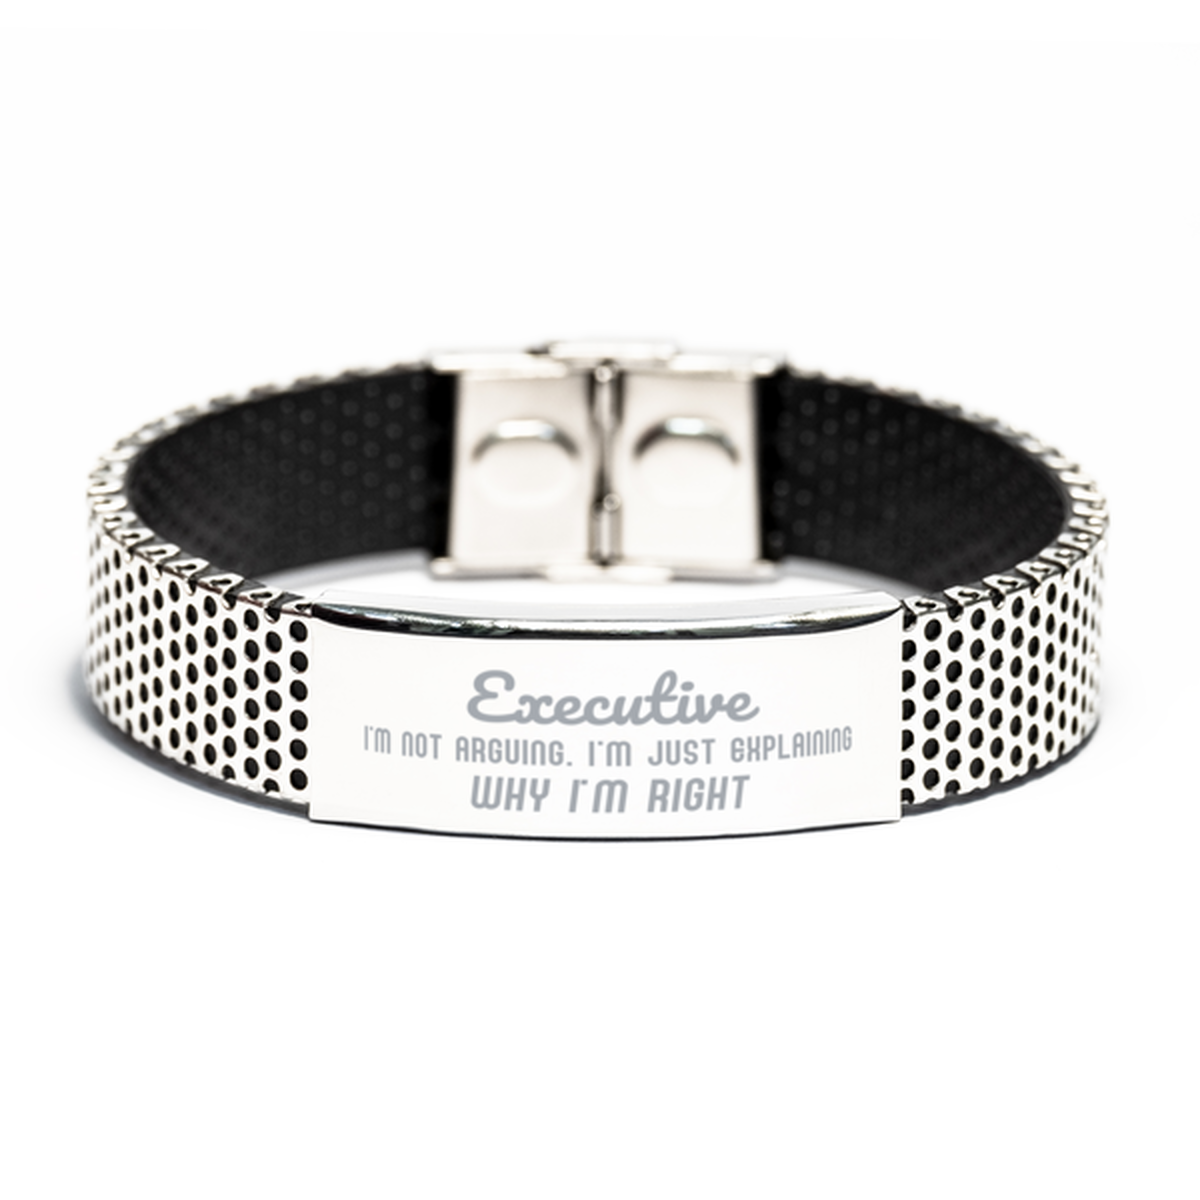 Executive I'm not Arguing. I'm Just Explaining Why I'm RIGHT Stainless Steel Bracelet, Funny Saying Quote Executive Gifts For Executive Graduation Birthday Christmas Gifts for Men Women Coworker